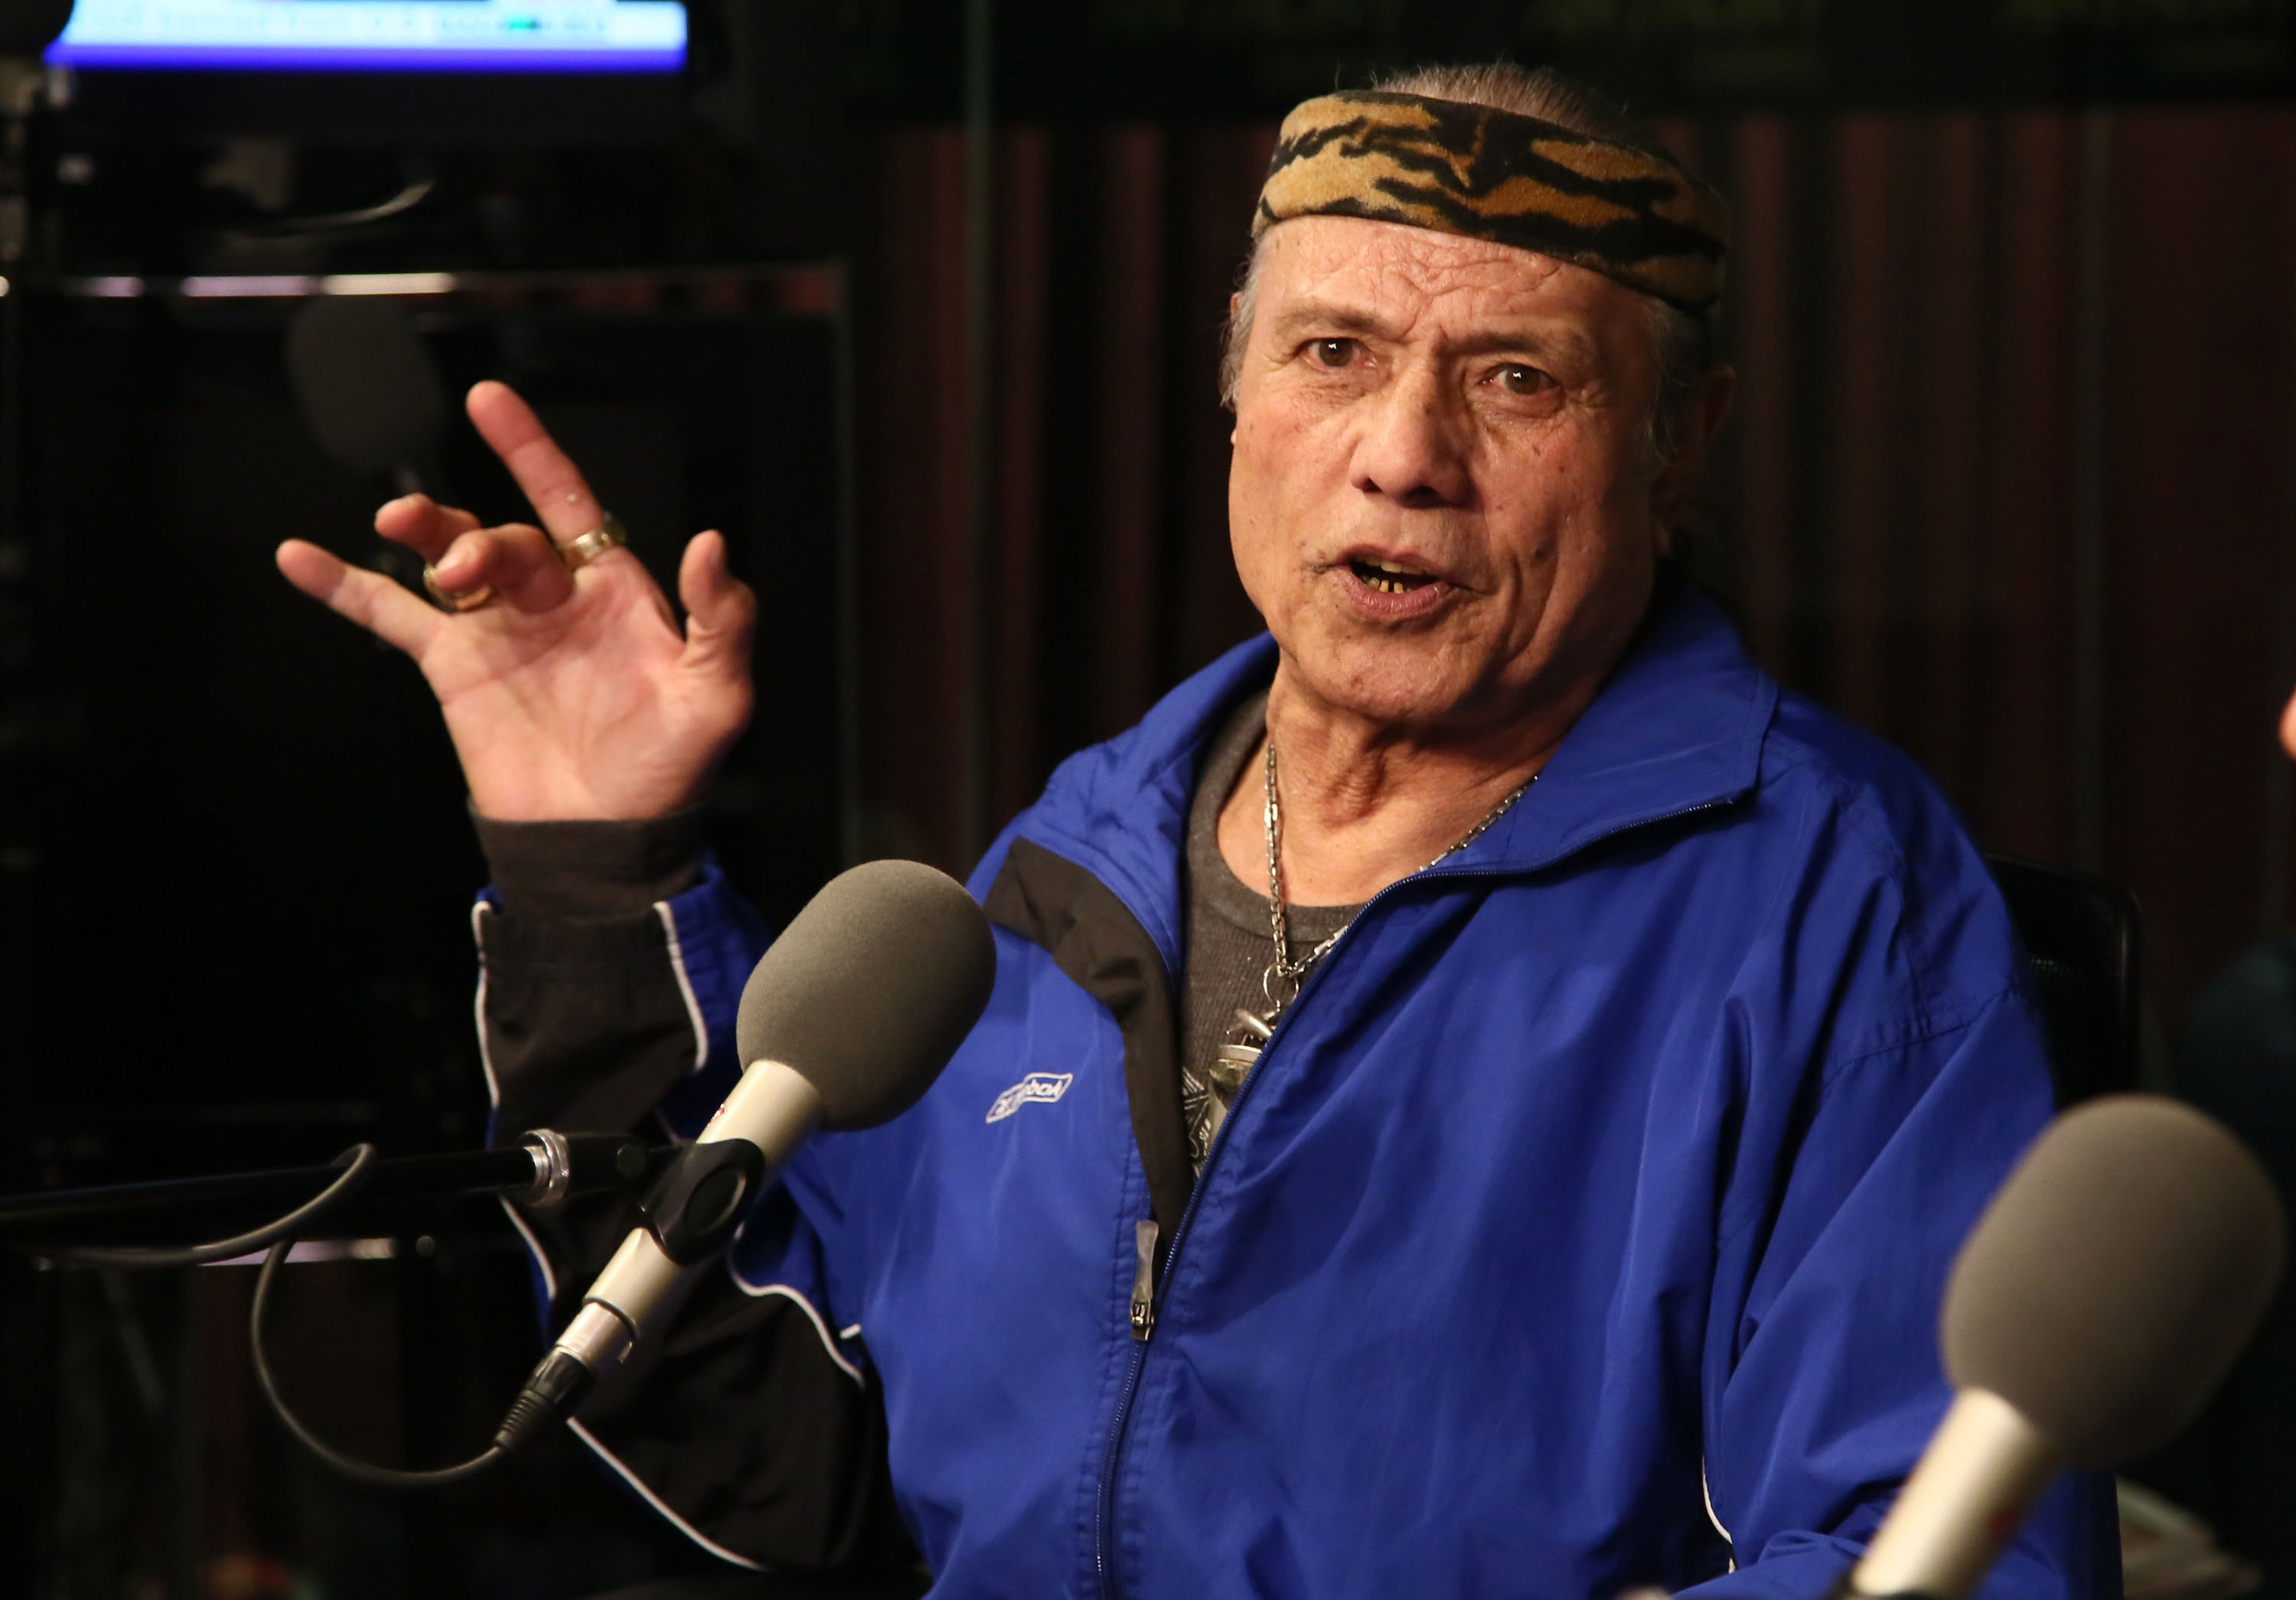 Jimmy "Superfly" Snuka visits "The Opie &amp; Anthony Show" at SiriusXM studios on January 9, 2013 in New York City. (Astrid Stawiarz&mdash;Getty Images)